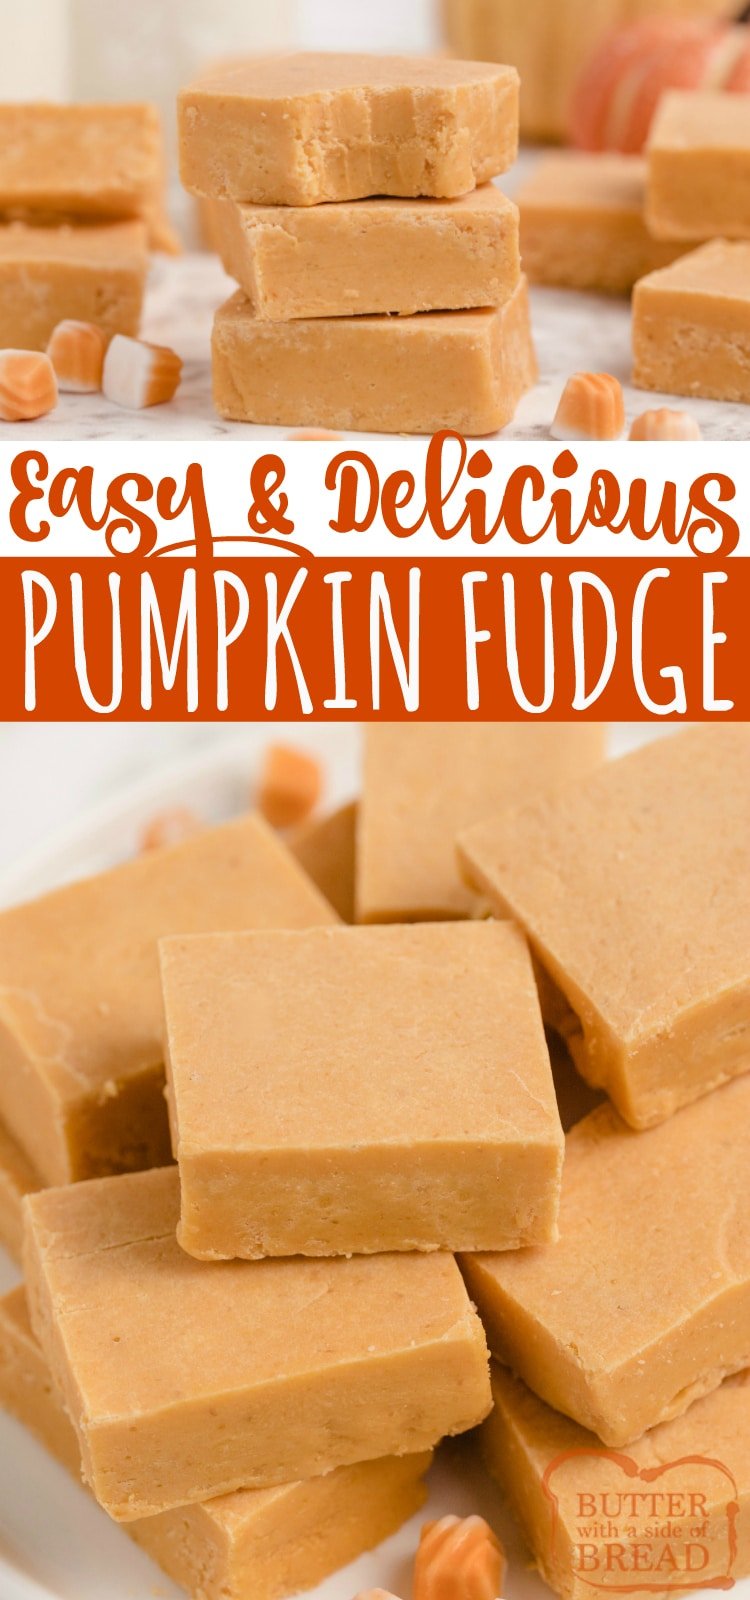 Easy Pumpkin Fudge made with pumpkin, cinnamon chips, marshmallow creme and a few other basic ingredients. One of our favorite fall candy recipes!